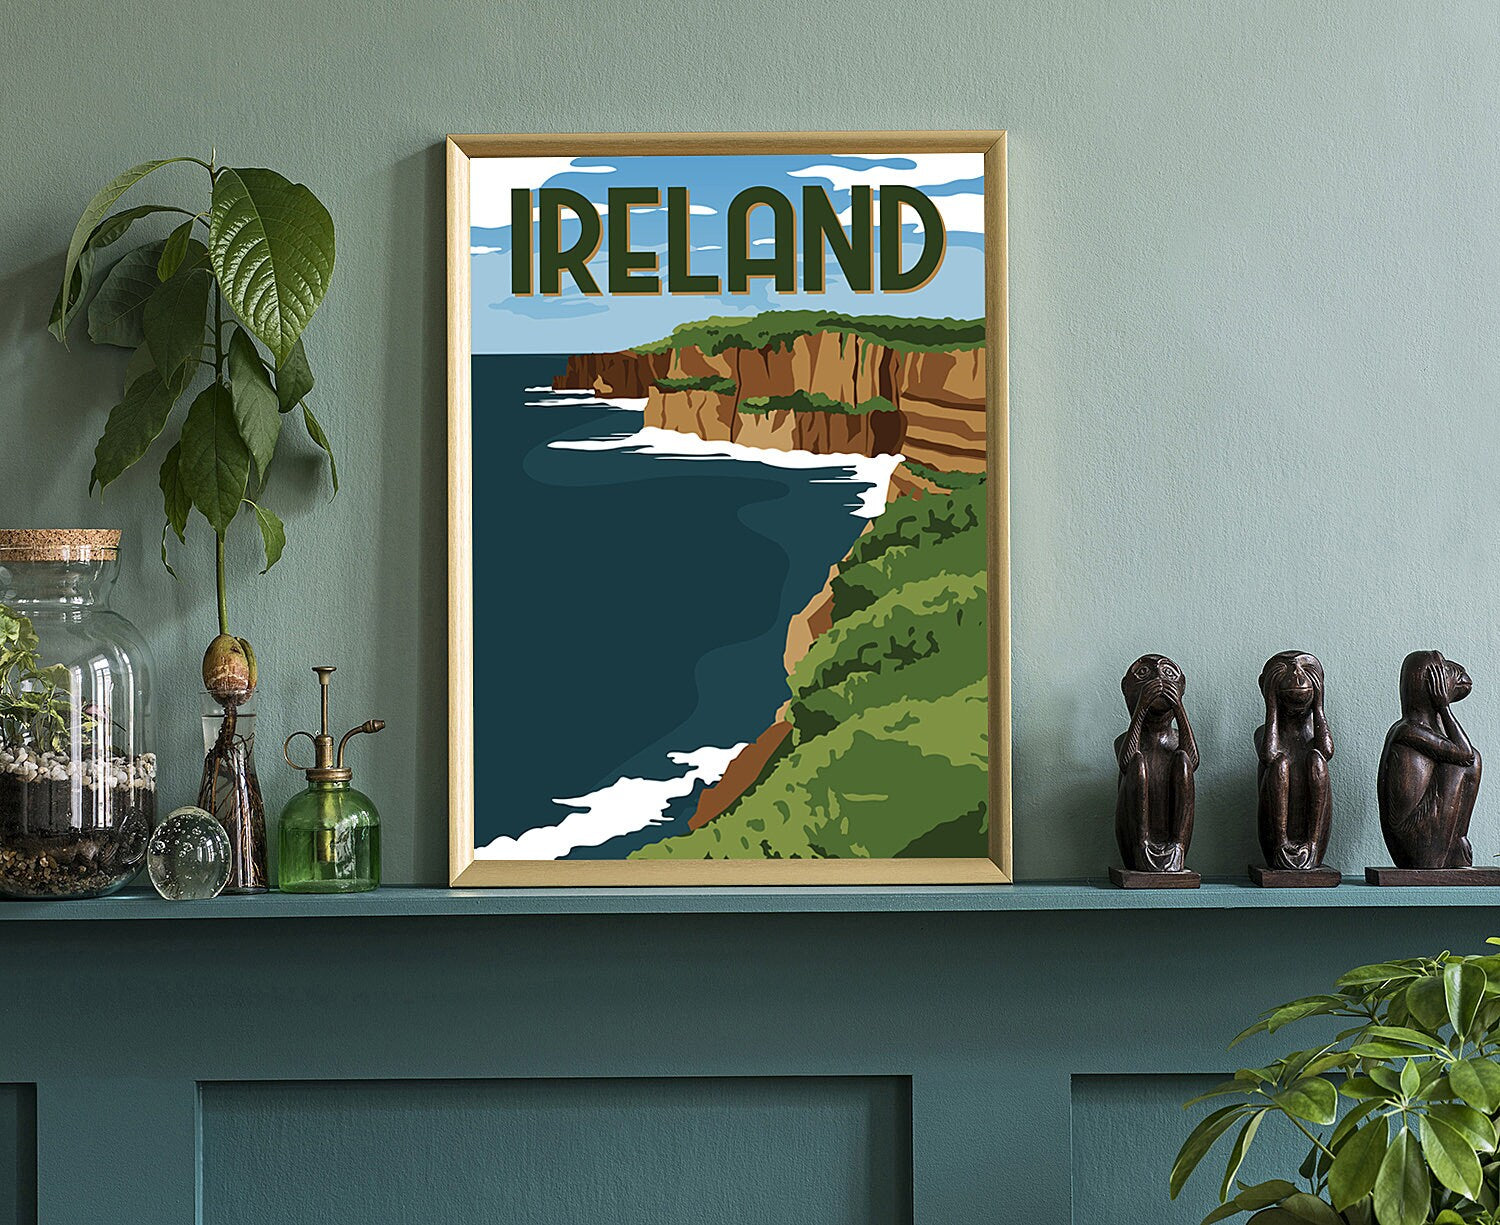 IRELAND retro style travel poster, Ireland vintage rustic poster print, Home wall art, Office wall decorations, Ireland country map posters